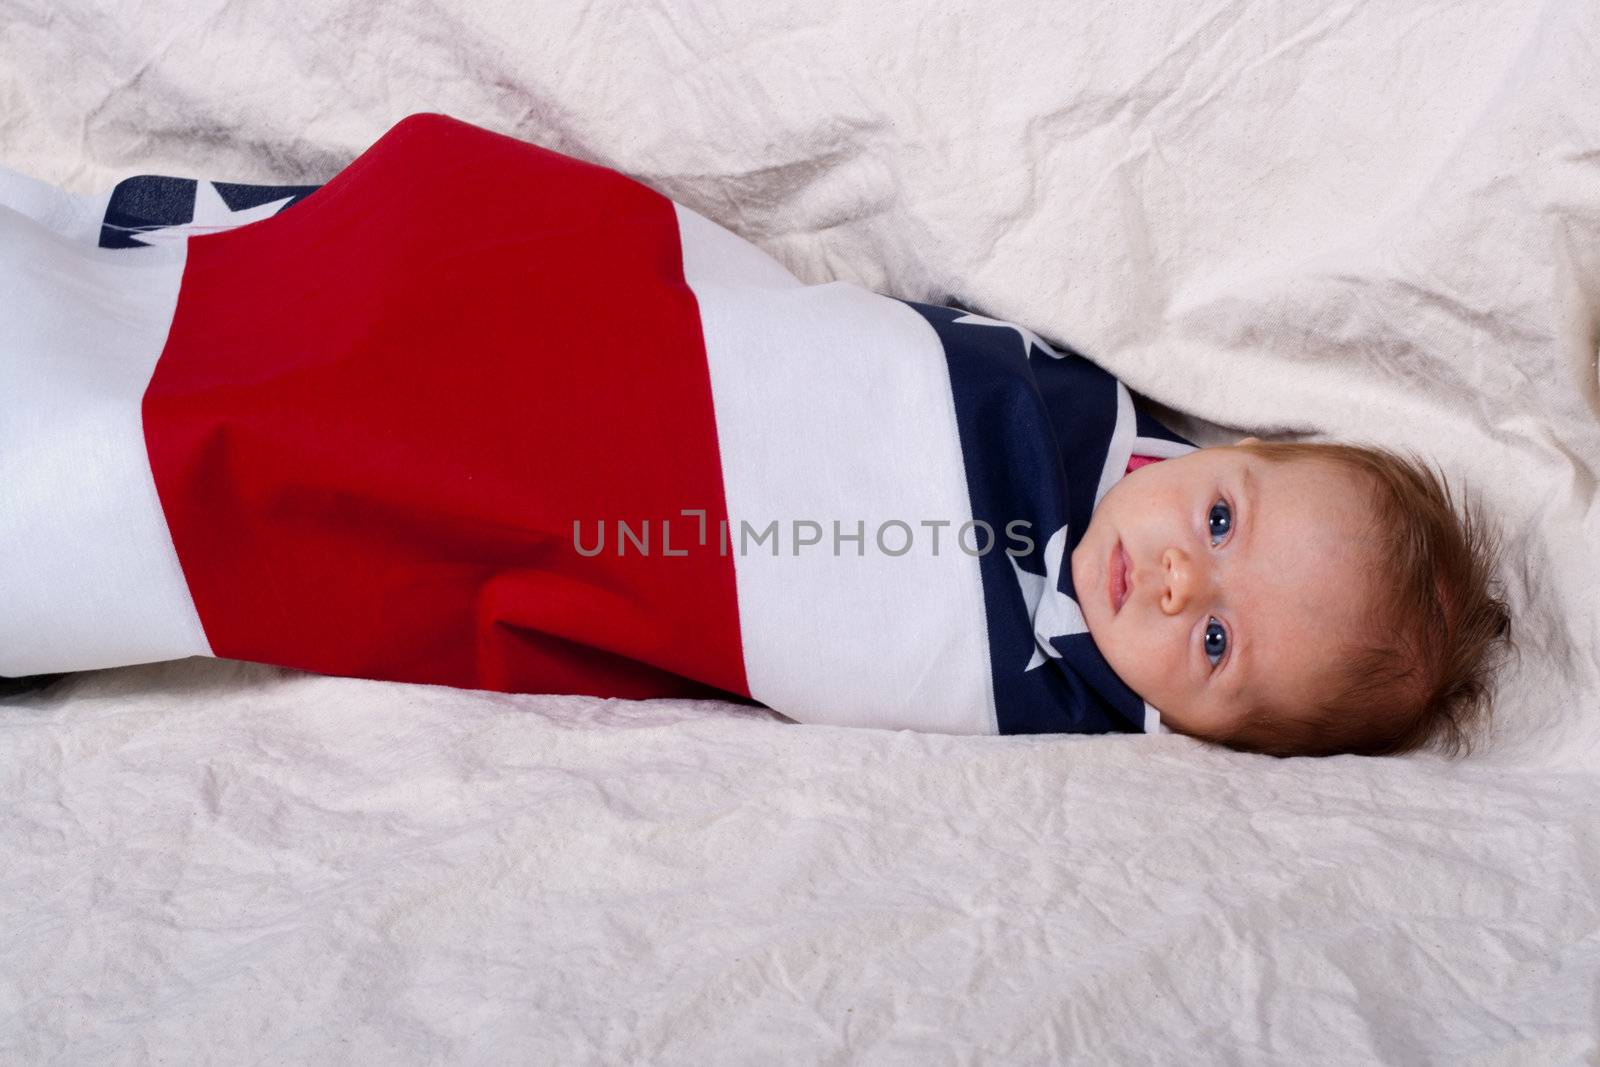 This adorable baby represents 4th of July/ Independence day and the protection that America gives all babies that are born in the United States.